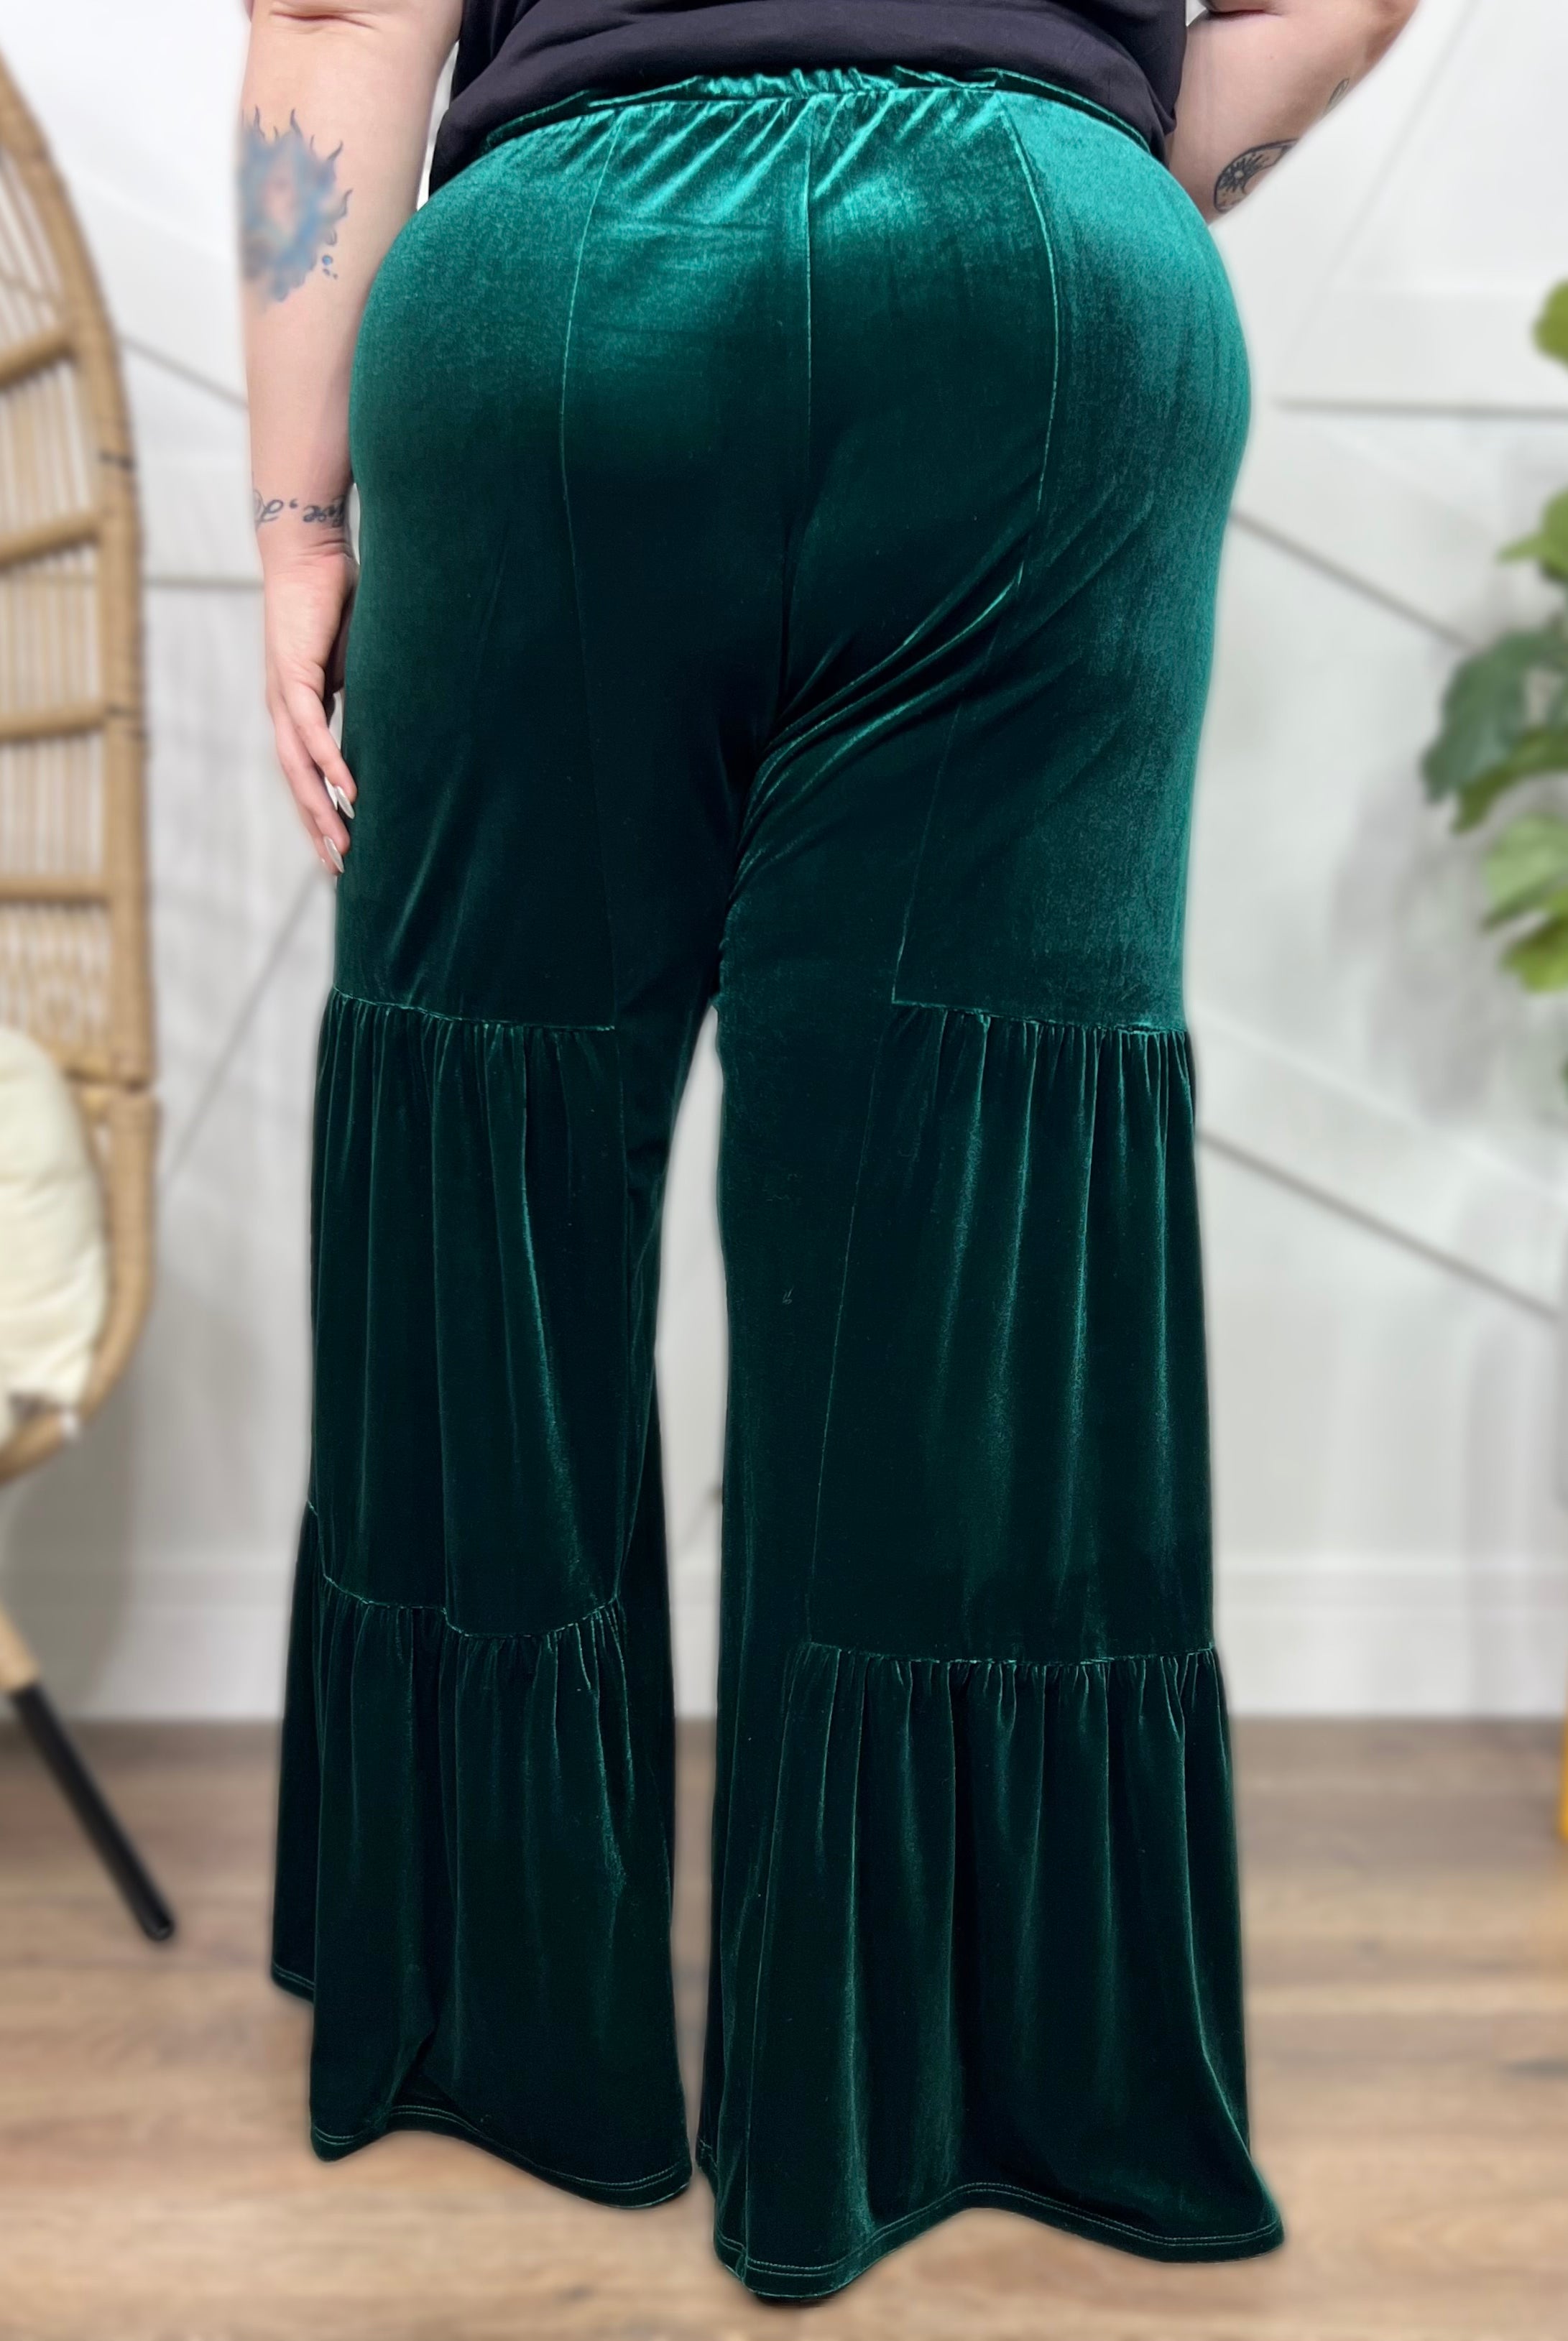 Glamorous Flare Pants-150 PANTS-GeeGee-Heathered Boho Boutique, Women's Fashion and Accessories in Palmetto, FL